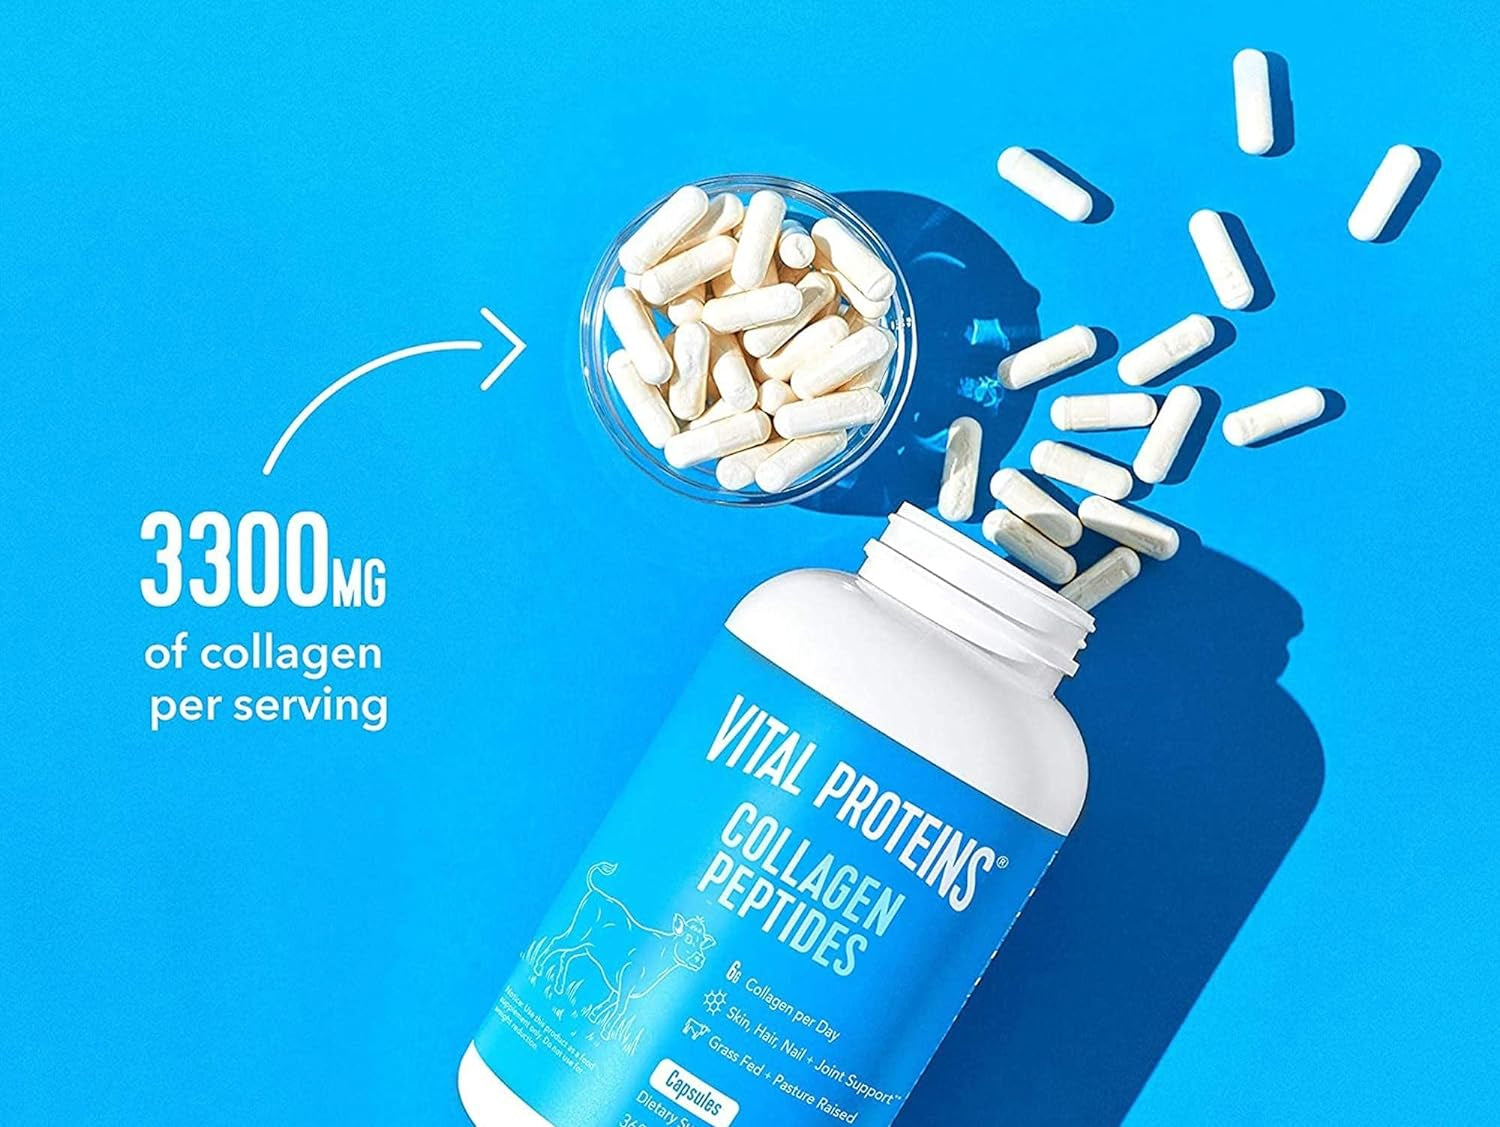 "360 Capsules of Vital Proteins Collagen for Healthy Hair & Skin"